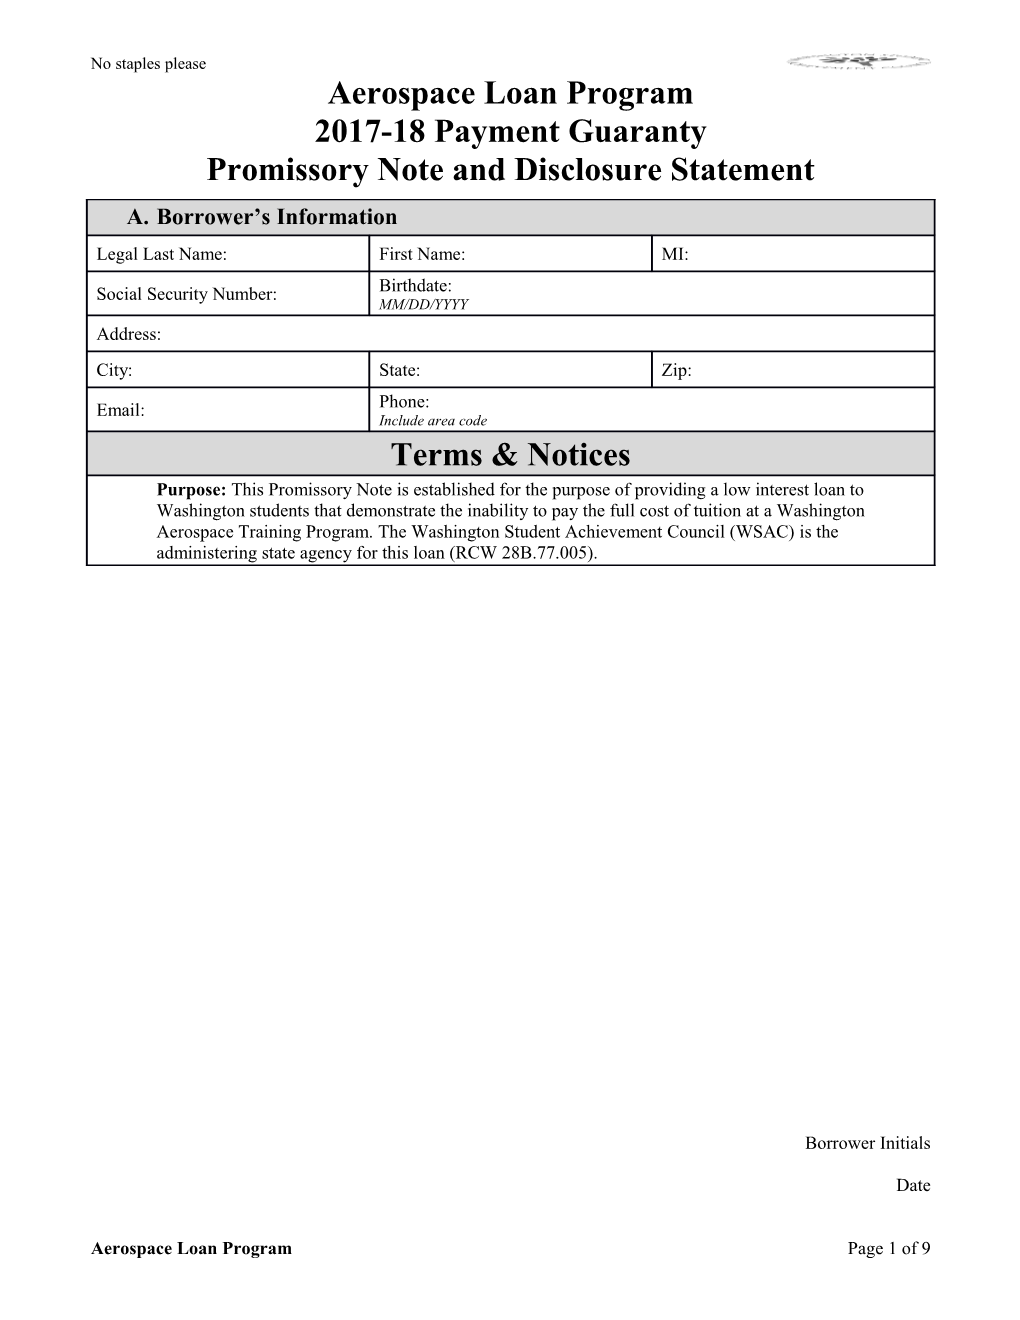 Promissory Note and Disclosure Statement